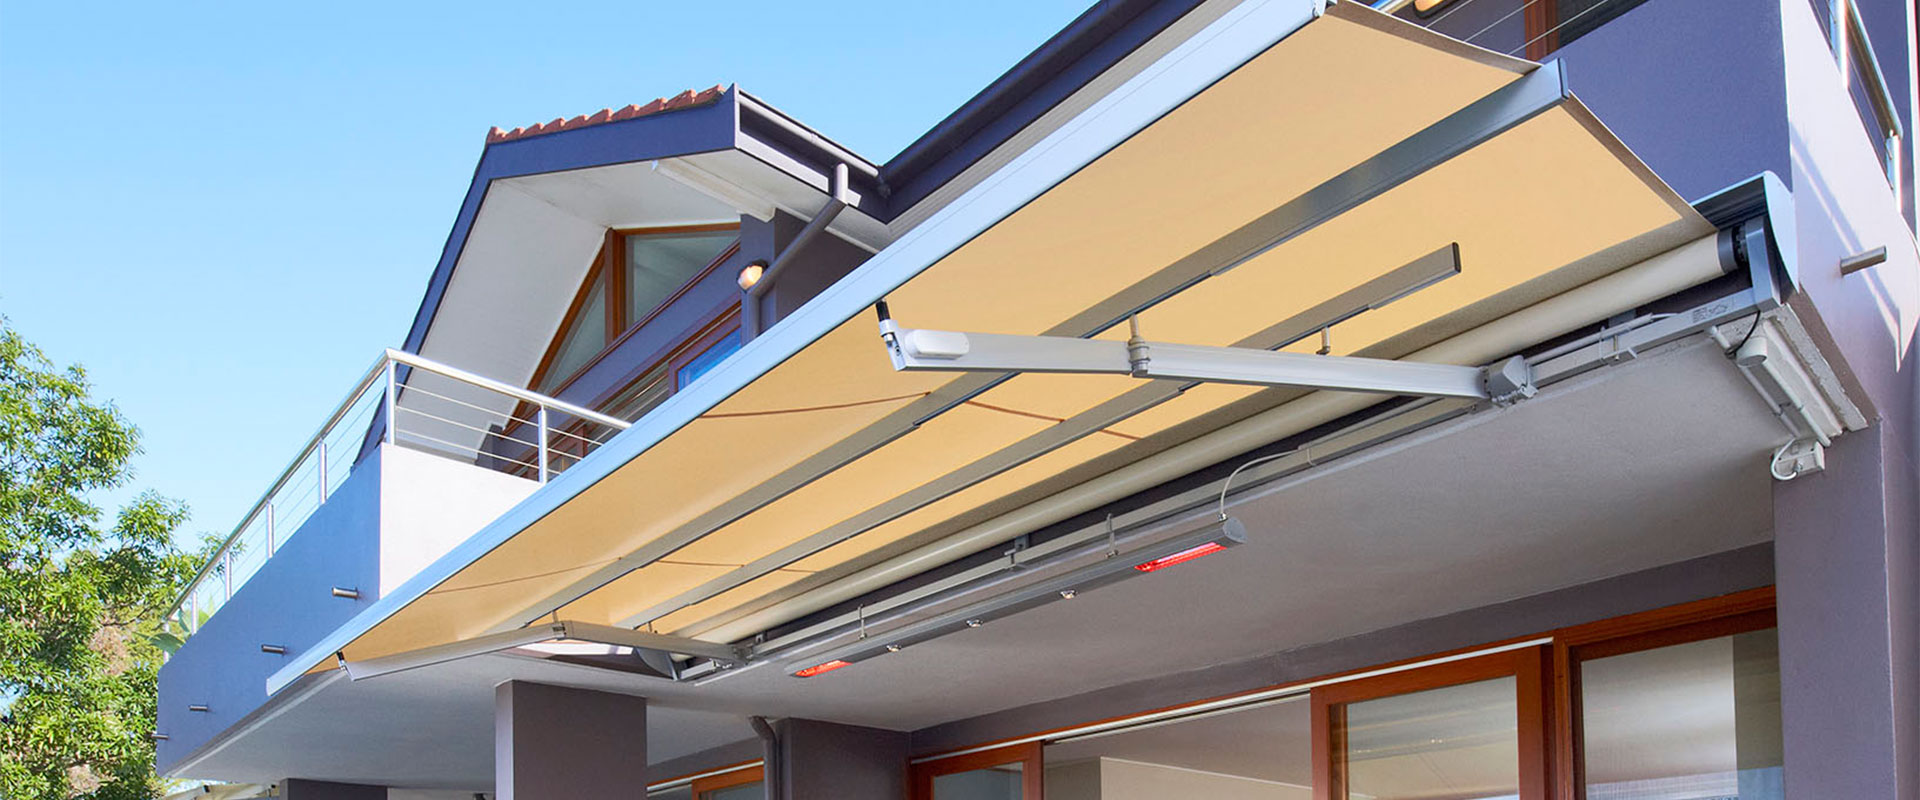 Forster Tuncurry Awnings & Blinds